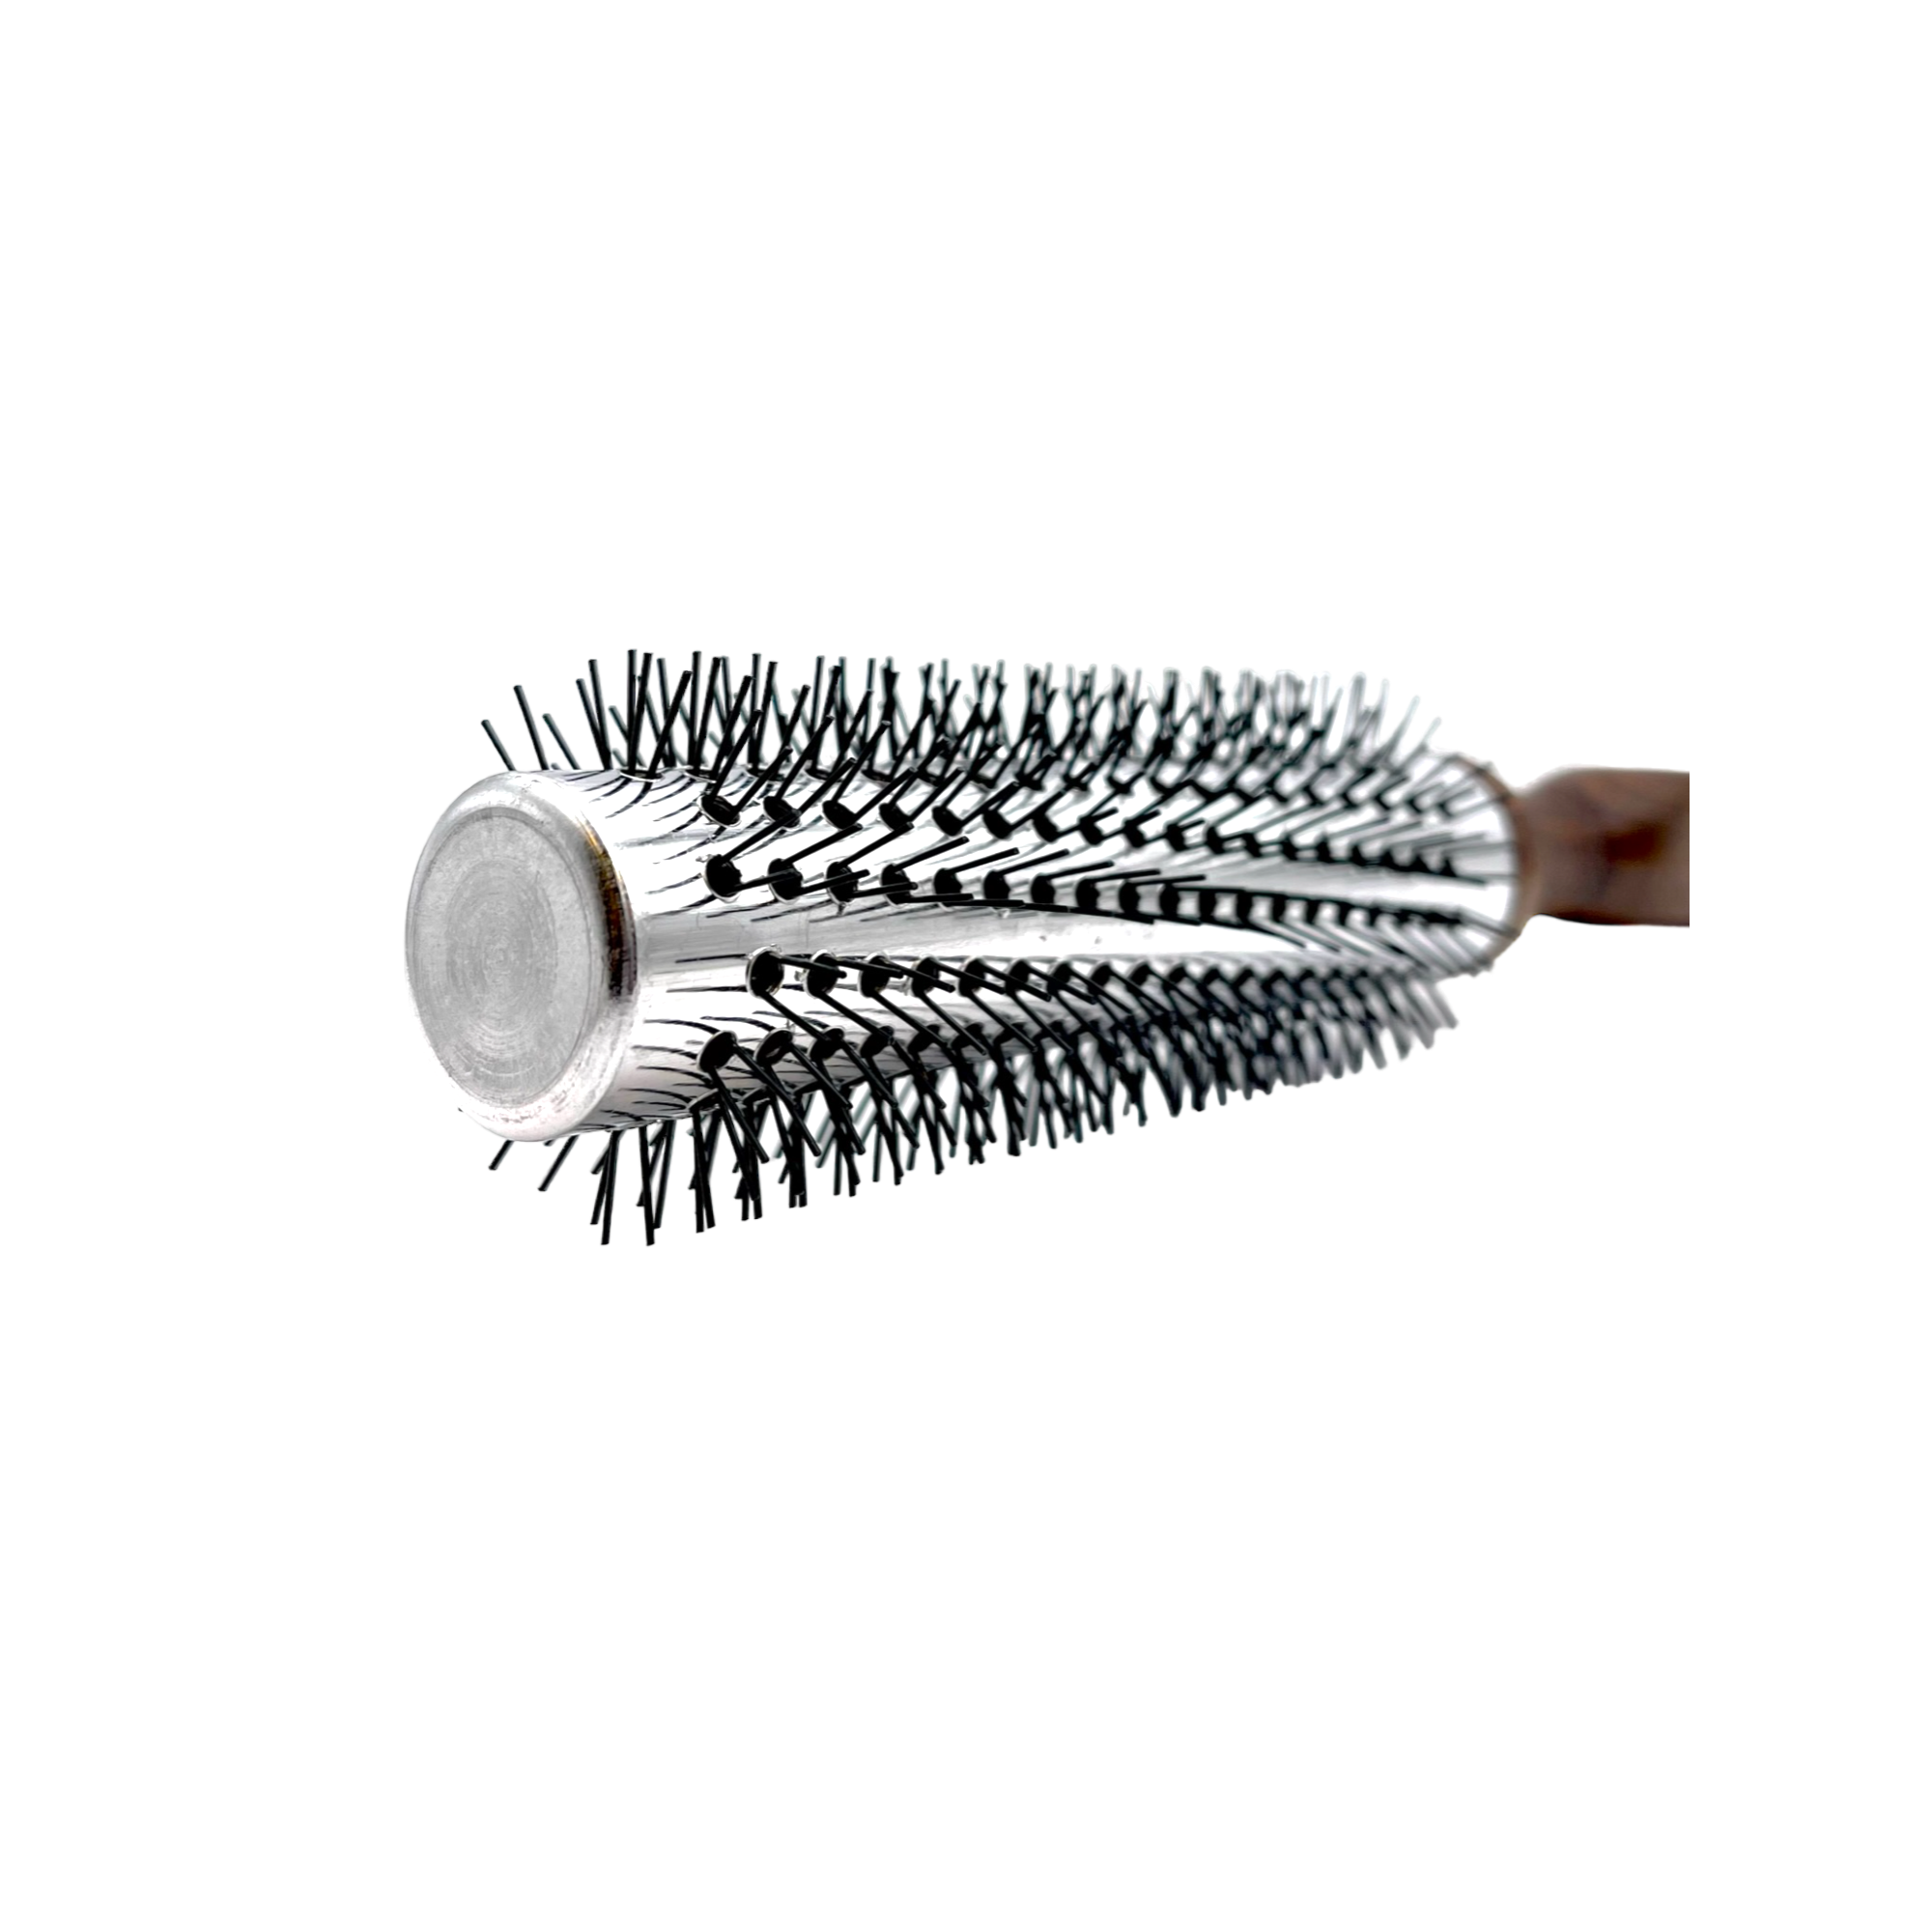 Dural Beech wood Quick-Styler hair brush with nylon pins